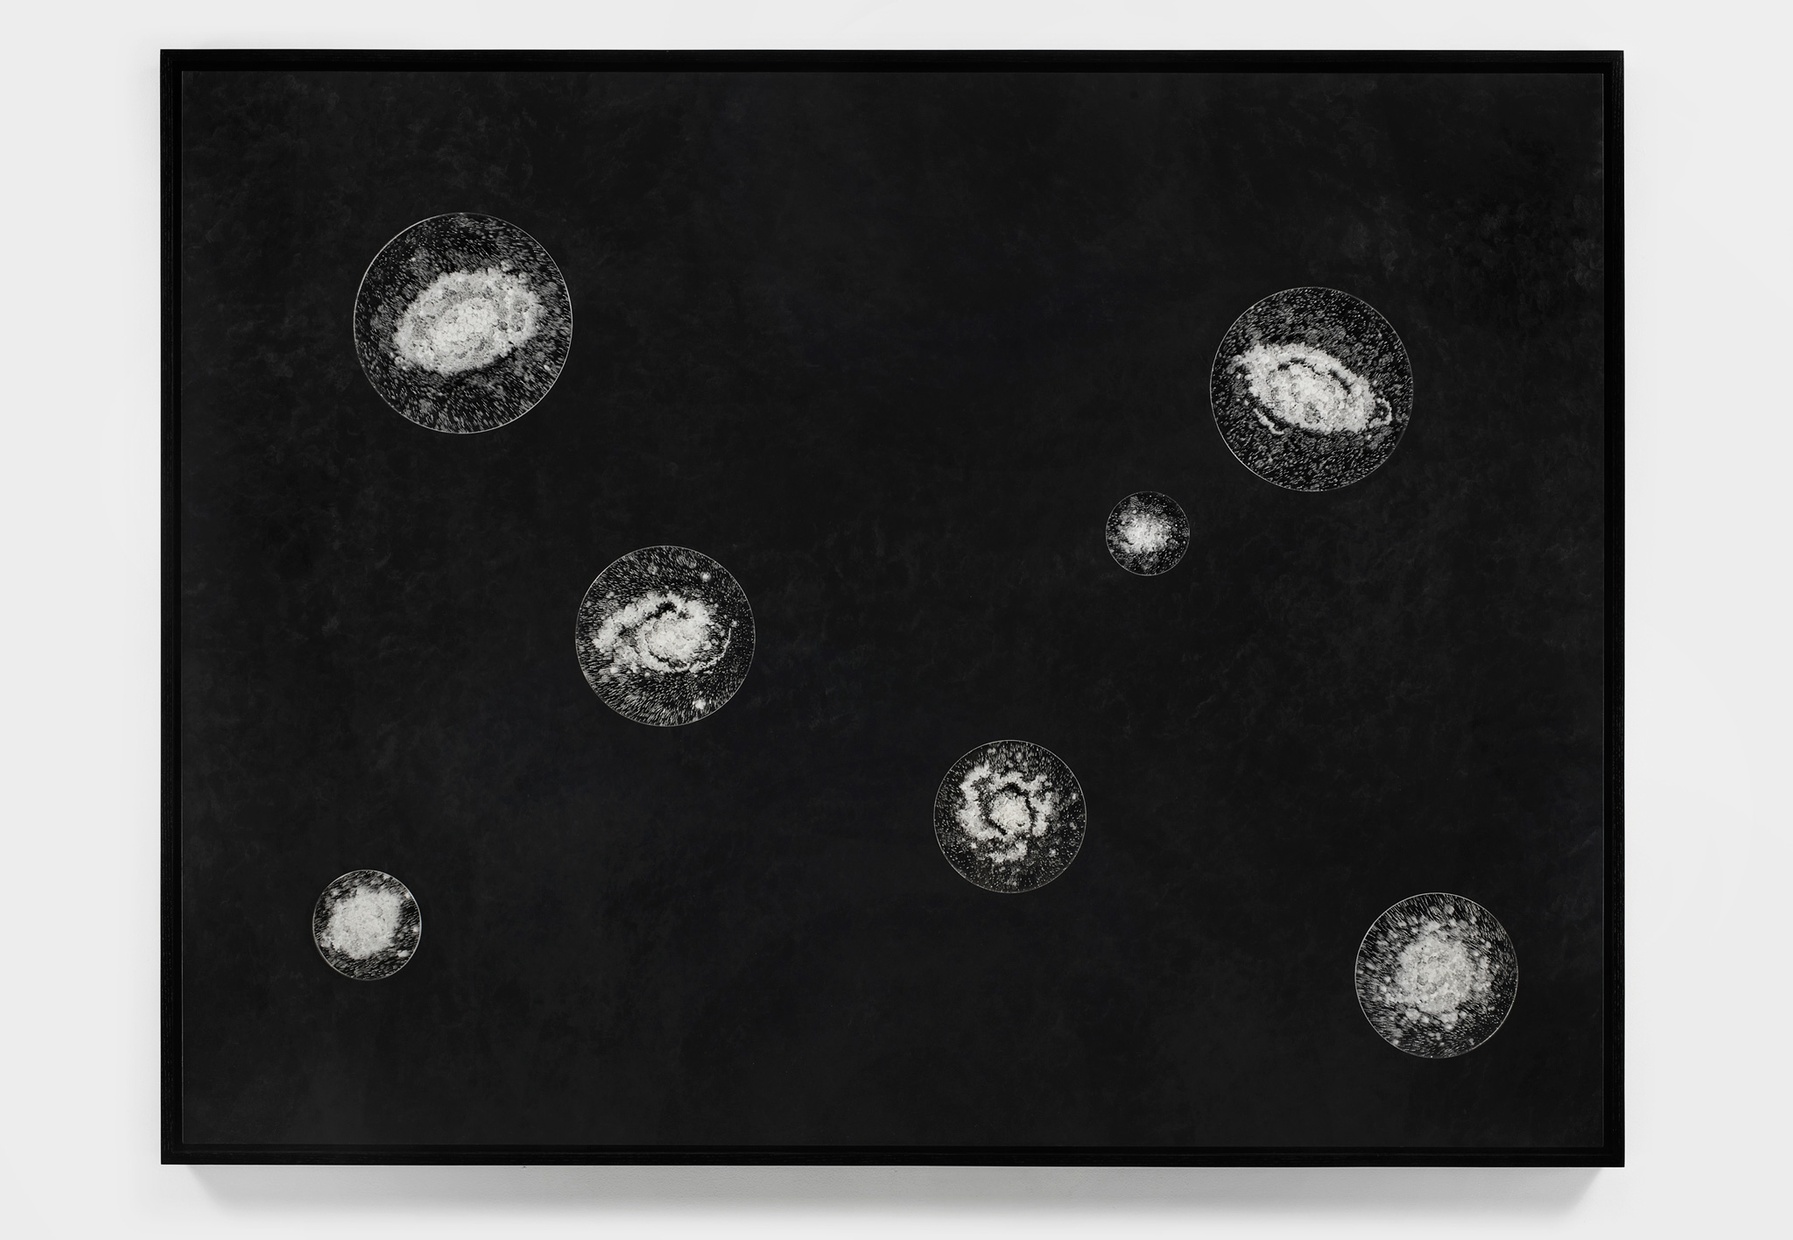 Against a black background are seven circles of various sizes containing clusters of white dots reminiscent of miniature galaxies.